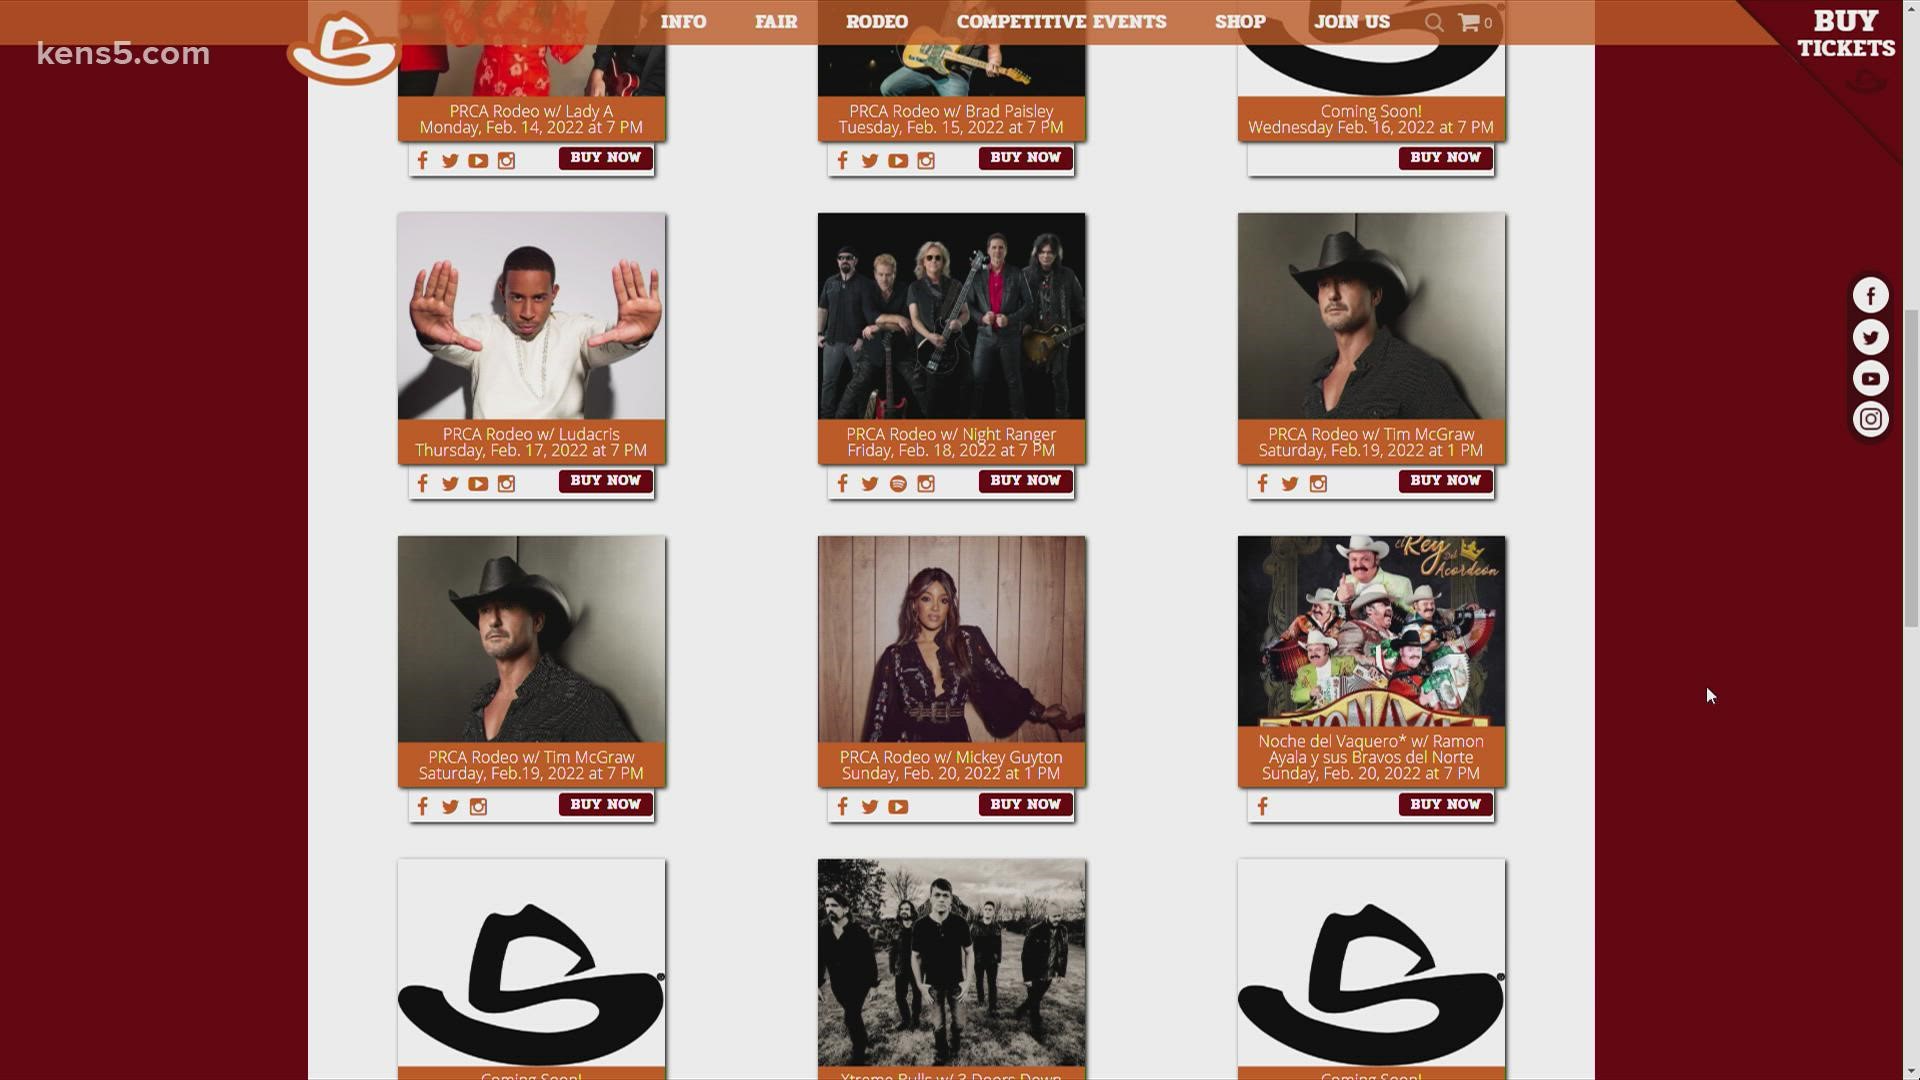 If you're looking to see one of these acts, you can grab your tickets on the rodeo's website or through Ticketmaster.